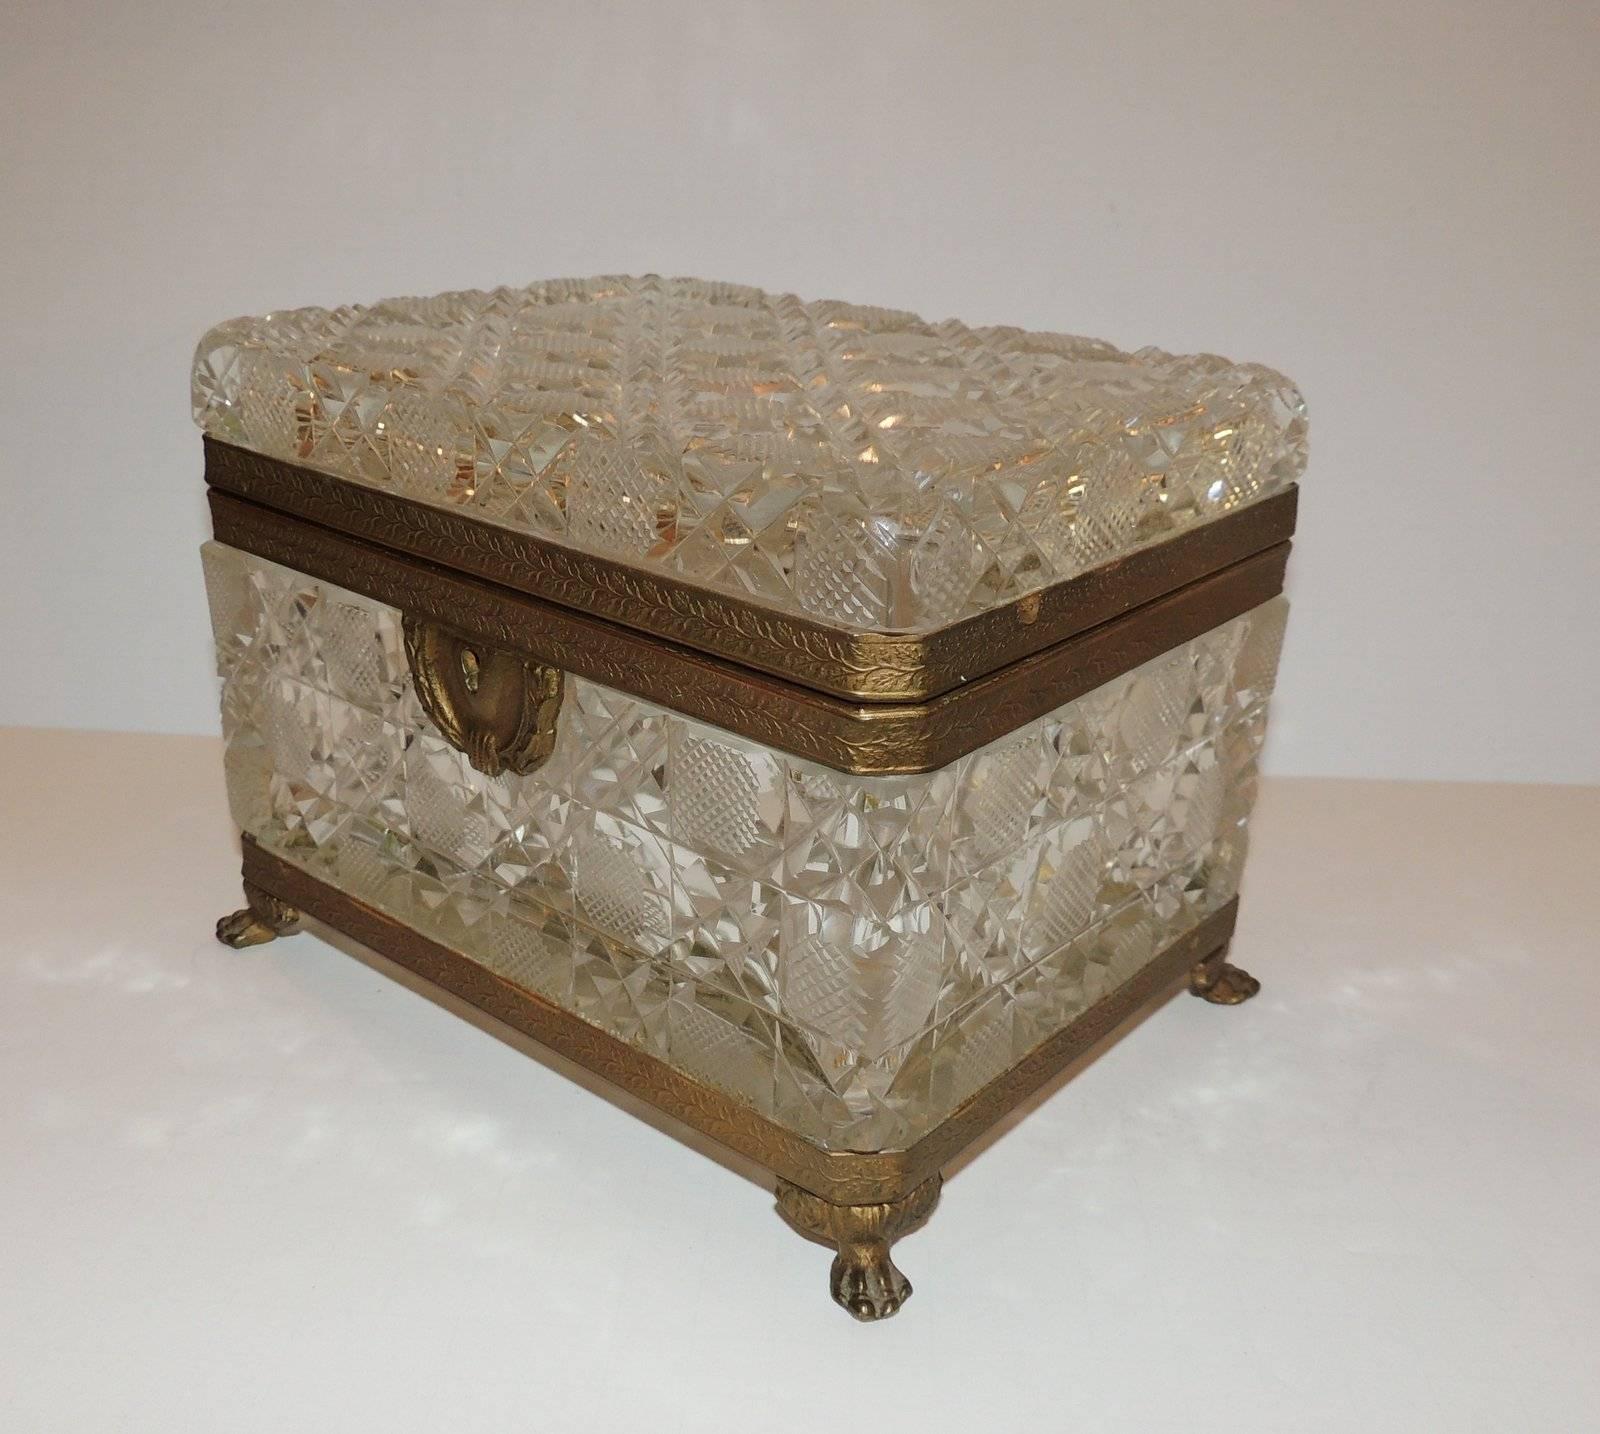 Belle Époque Wonderful French Faceted Crystal Bronze Ormolu-Mounted Footed Casket Jewelry Box